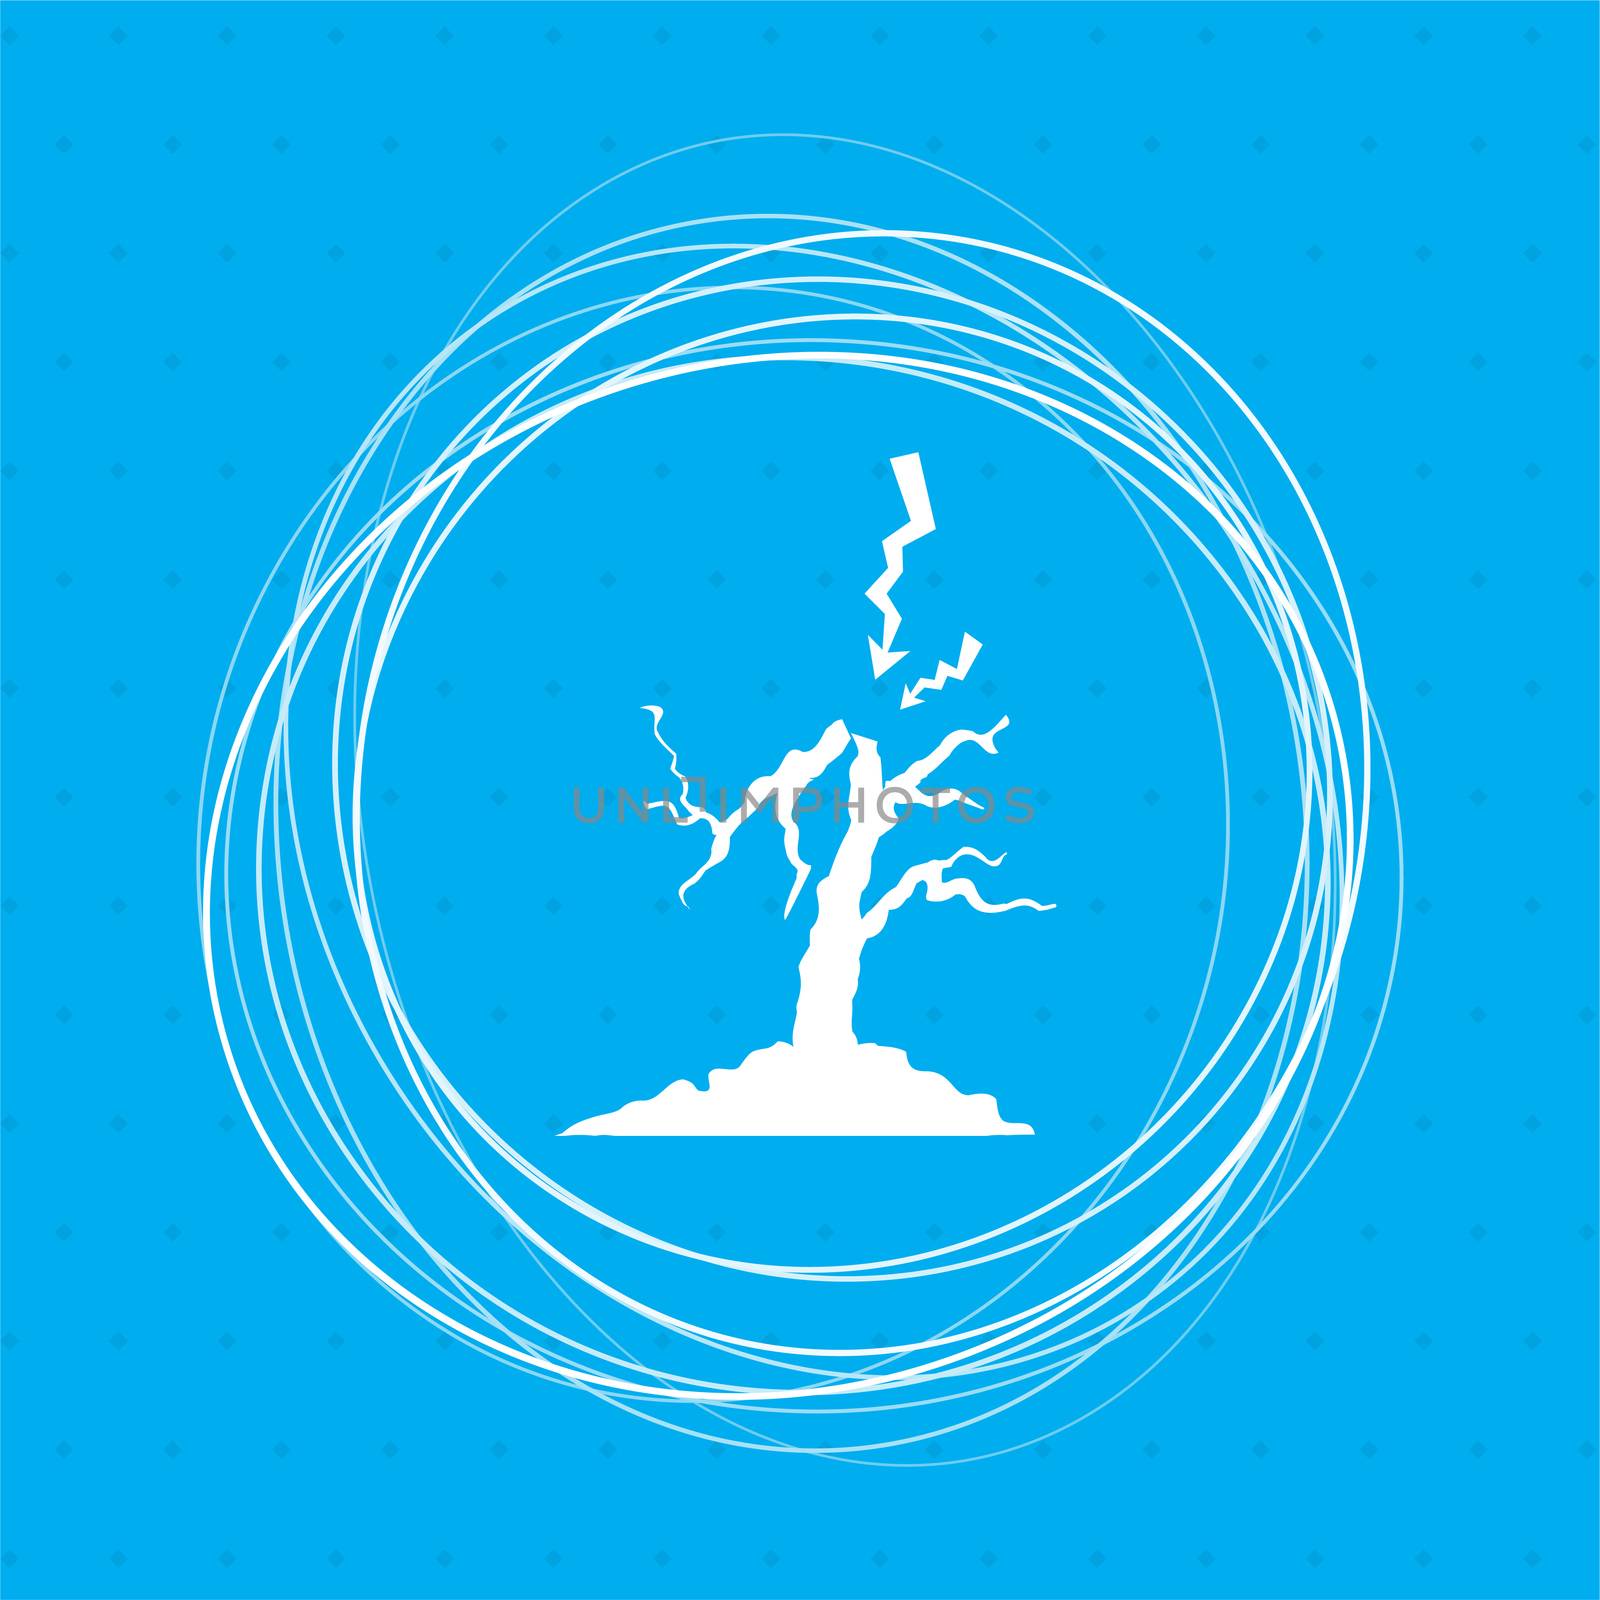 lightning and tree icon on a blue background with abstract circles around place for your text.  by Adamchuk